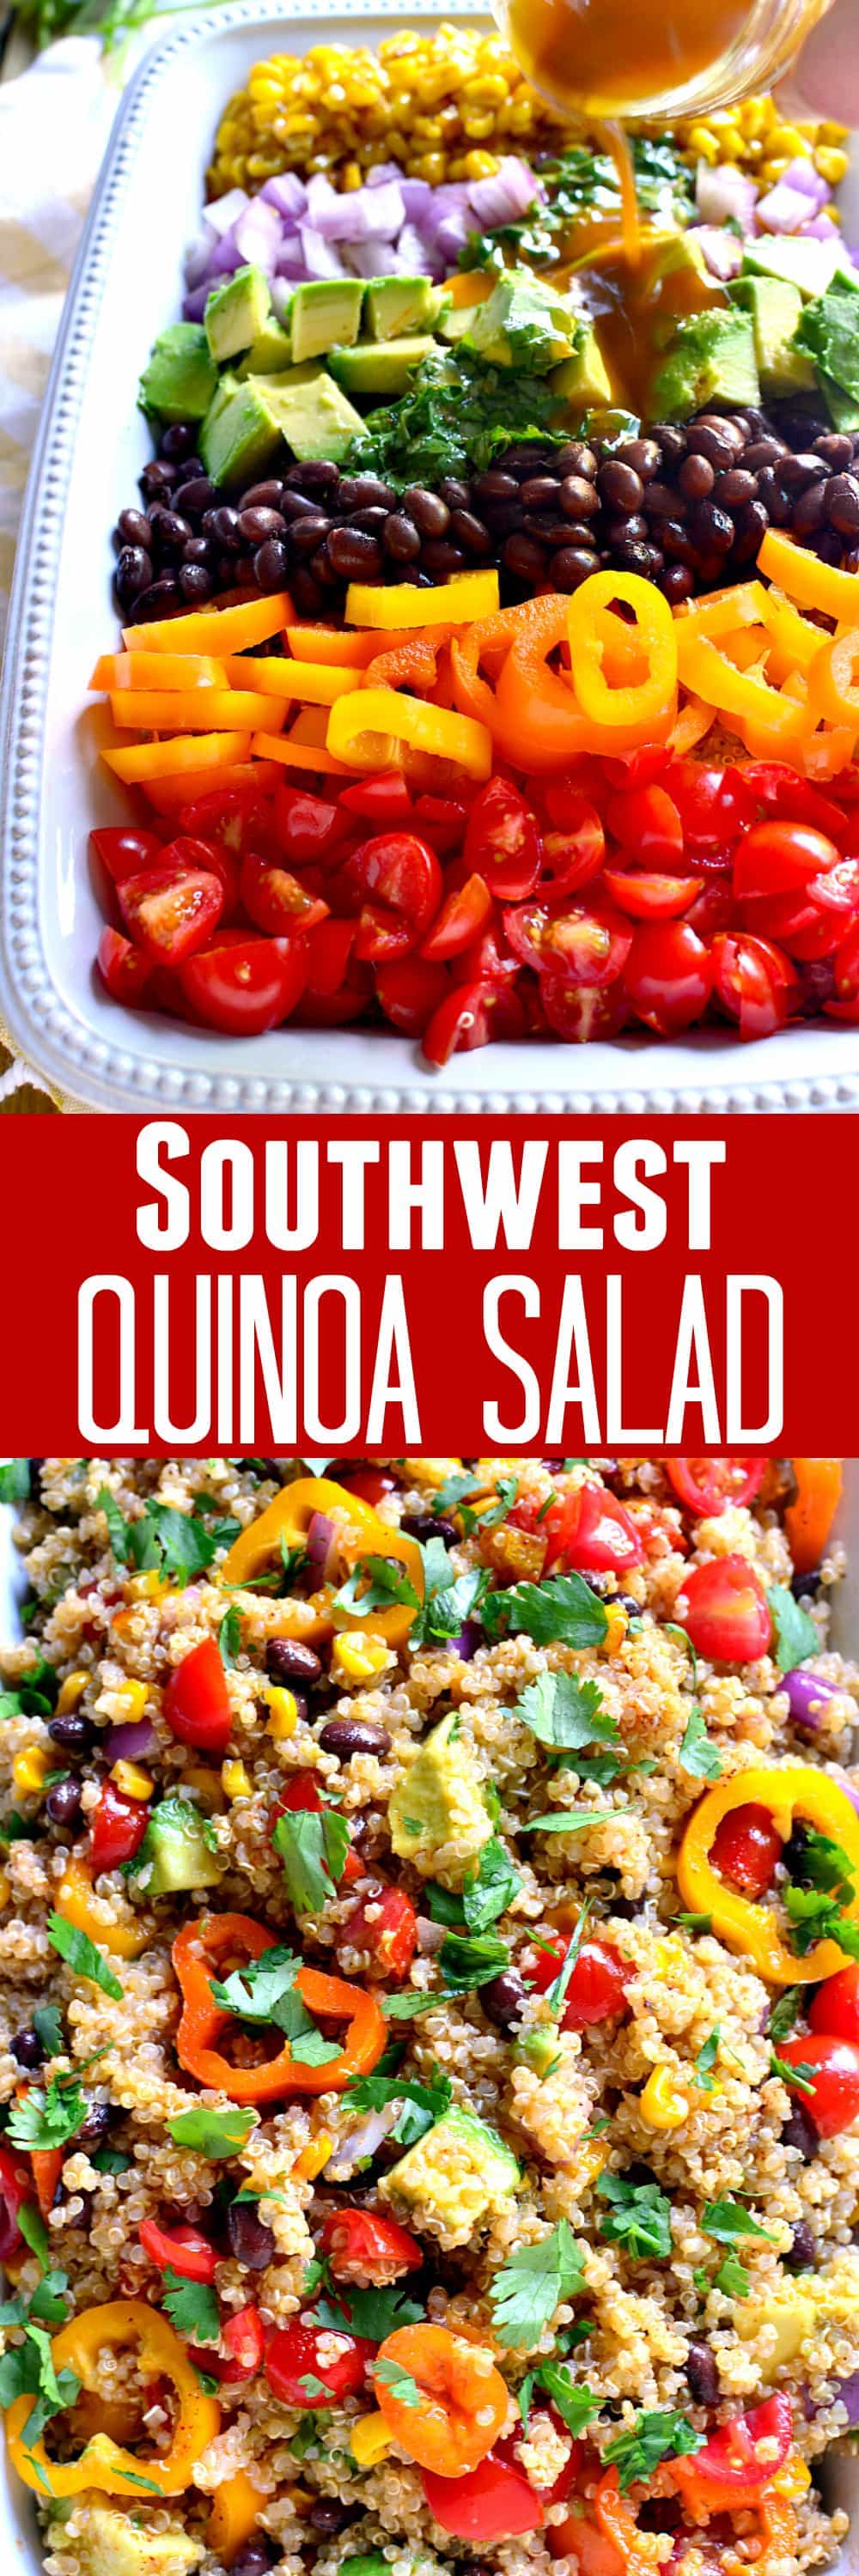 This Southwest Quinoa Salad is loaded with fresh veggies and packed with southwest flavor. The perfect side dish for any meal!